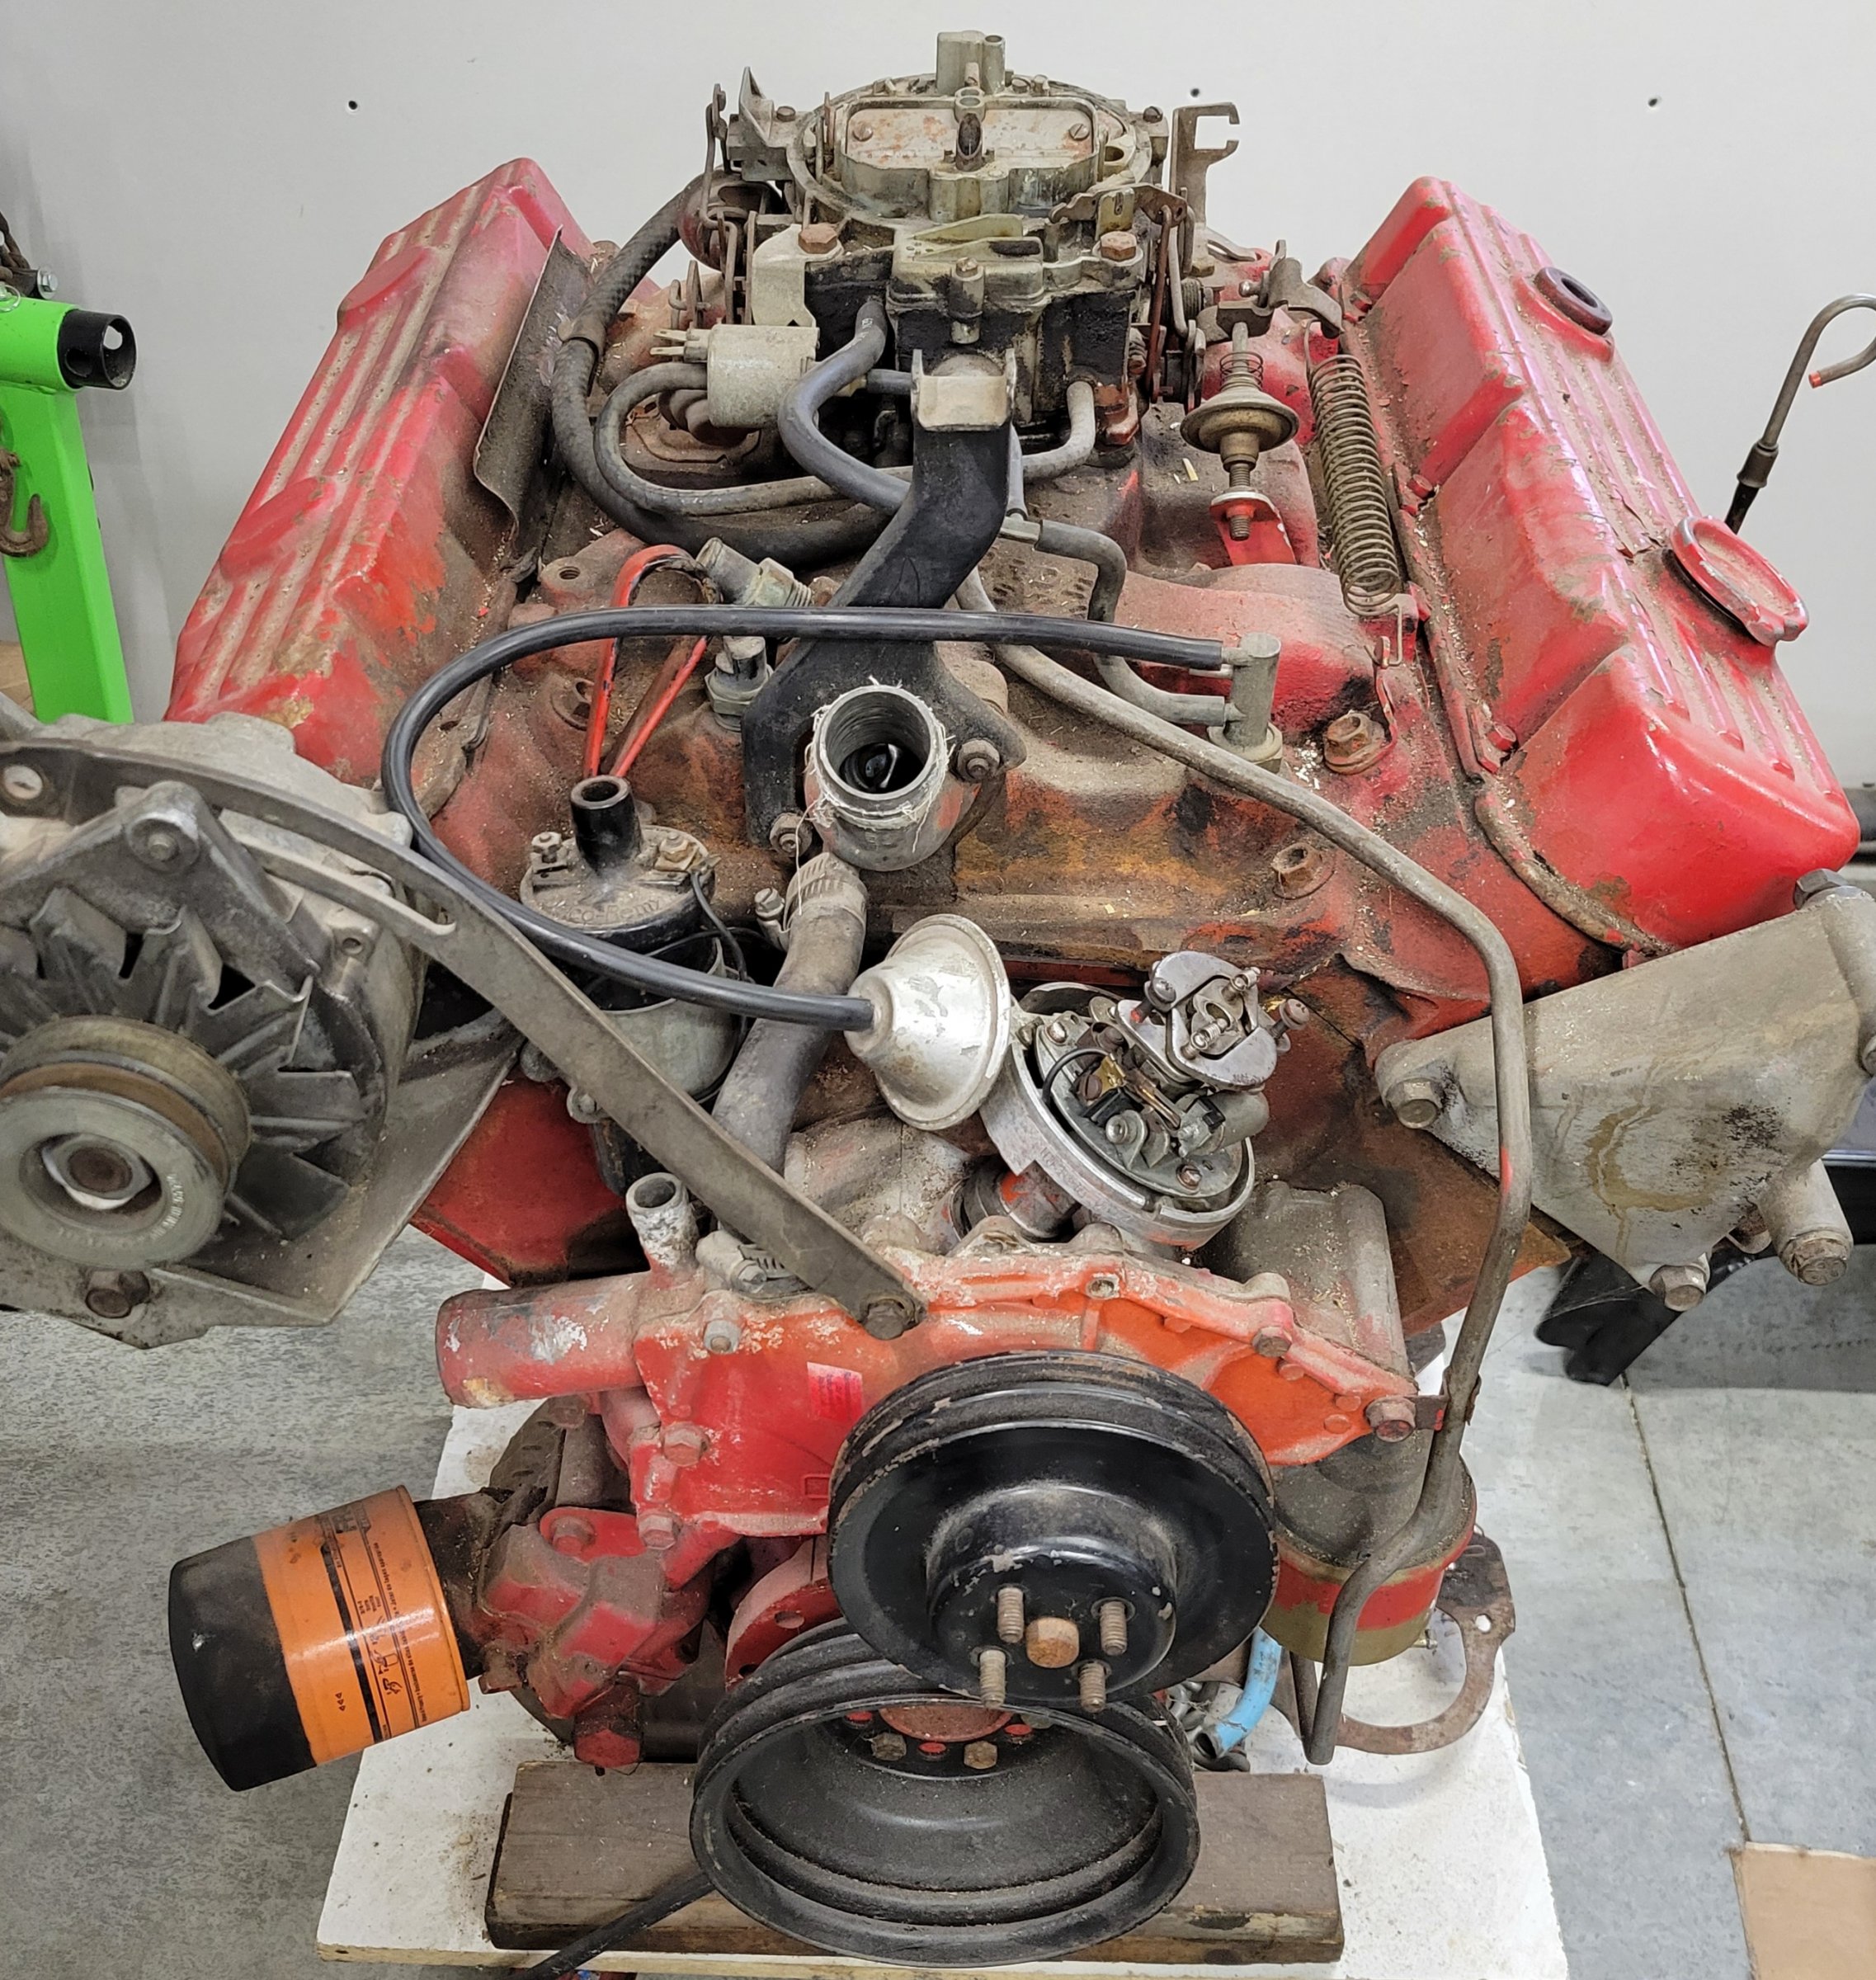 1970-455-engine-andnumbers-matching-turbo-400-team-buick